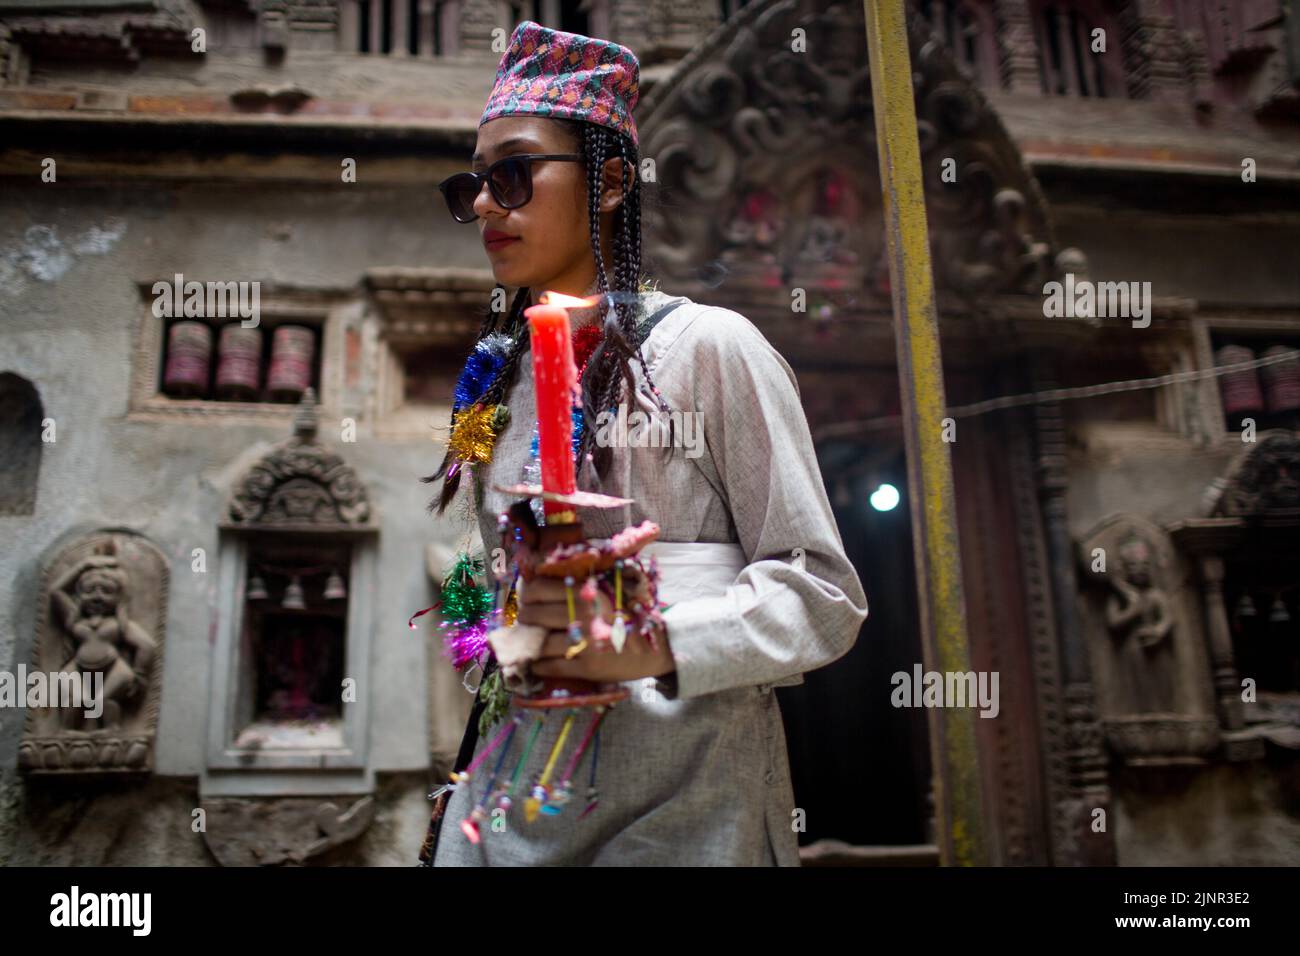 Lalitpur, Nepal. 13th Aug, 2022. A girl participates in a parade commemorating the Mataya festival, or the festival of lights, in Lalitpur, Nepal, Aug. 13, 2022. Credit: Sulav Shrestha/Xinhua/Alamy Live News Stock Photo